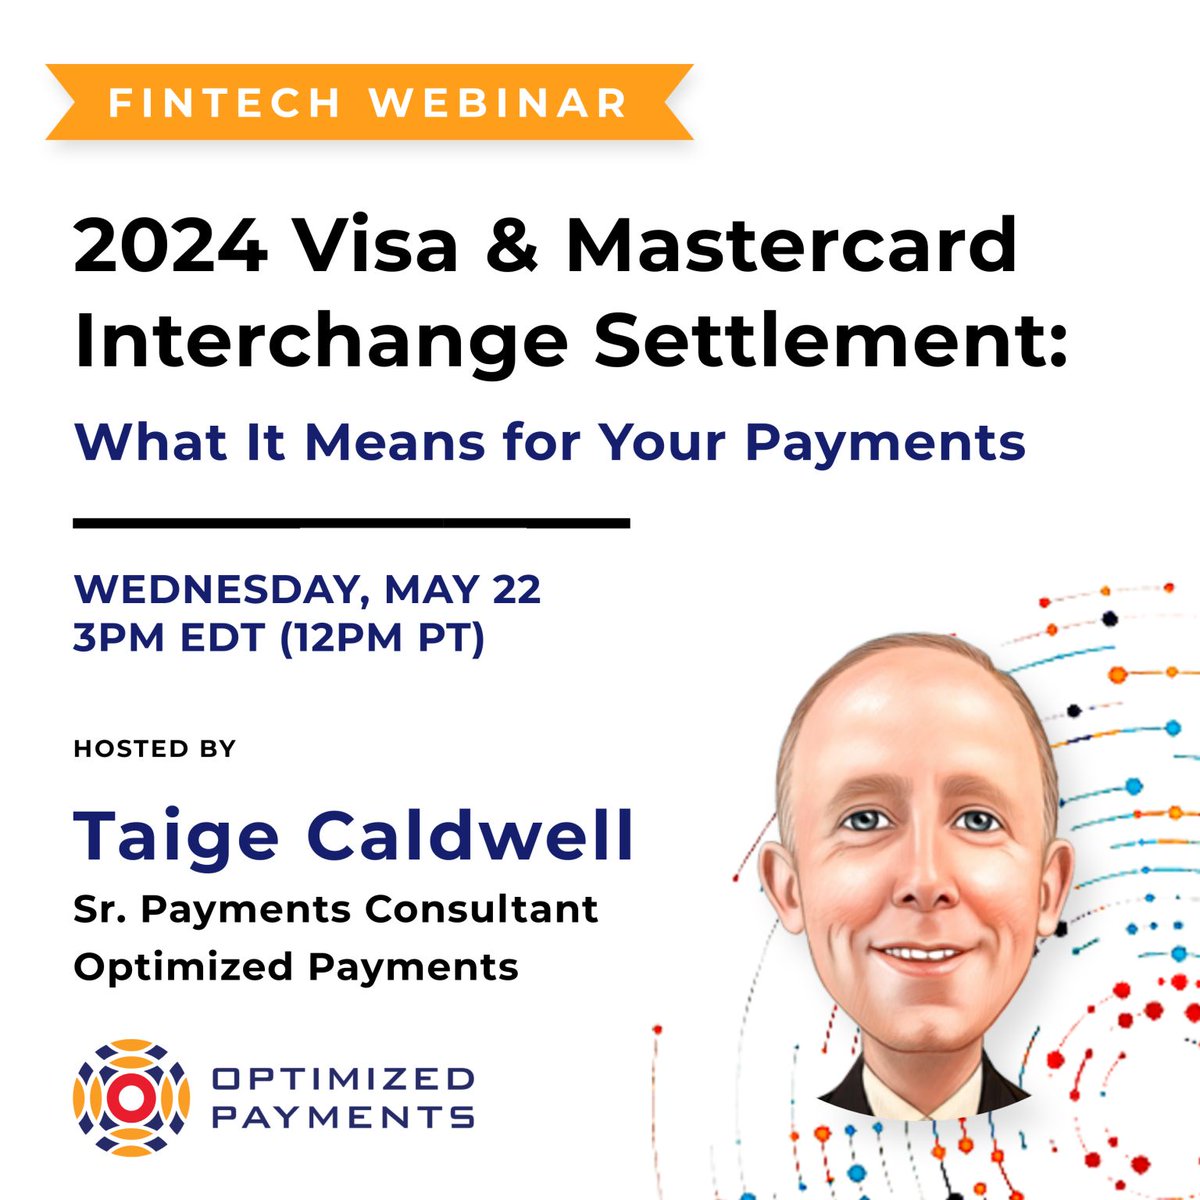 Join us for this webinar covering the impactful Visa/Mastercard settlement, and how it can affect your business' payments! REGISTER TODAY: zoom.us/webinar/regist… #optimizedpayments #fintechwebinar #paymentswebinar